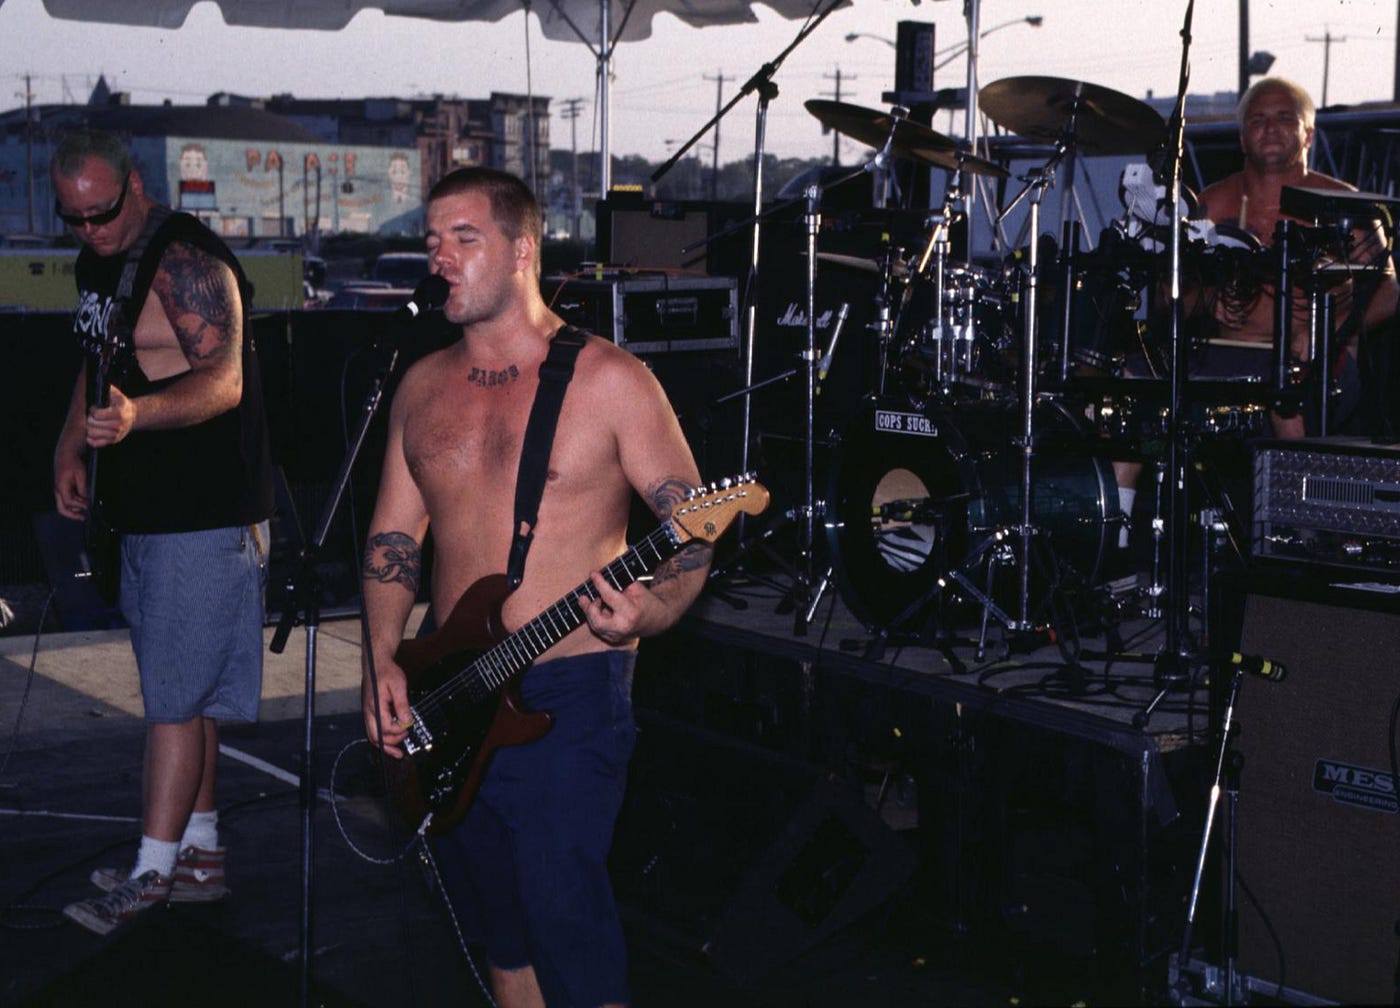 Sublime Played Their Most Powerful Song at Their Last Show | by Aaron  Gilbreath | Medium